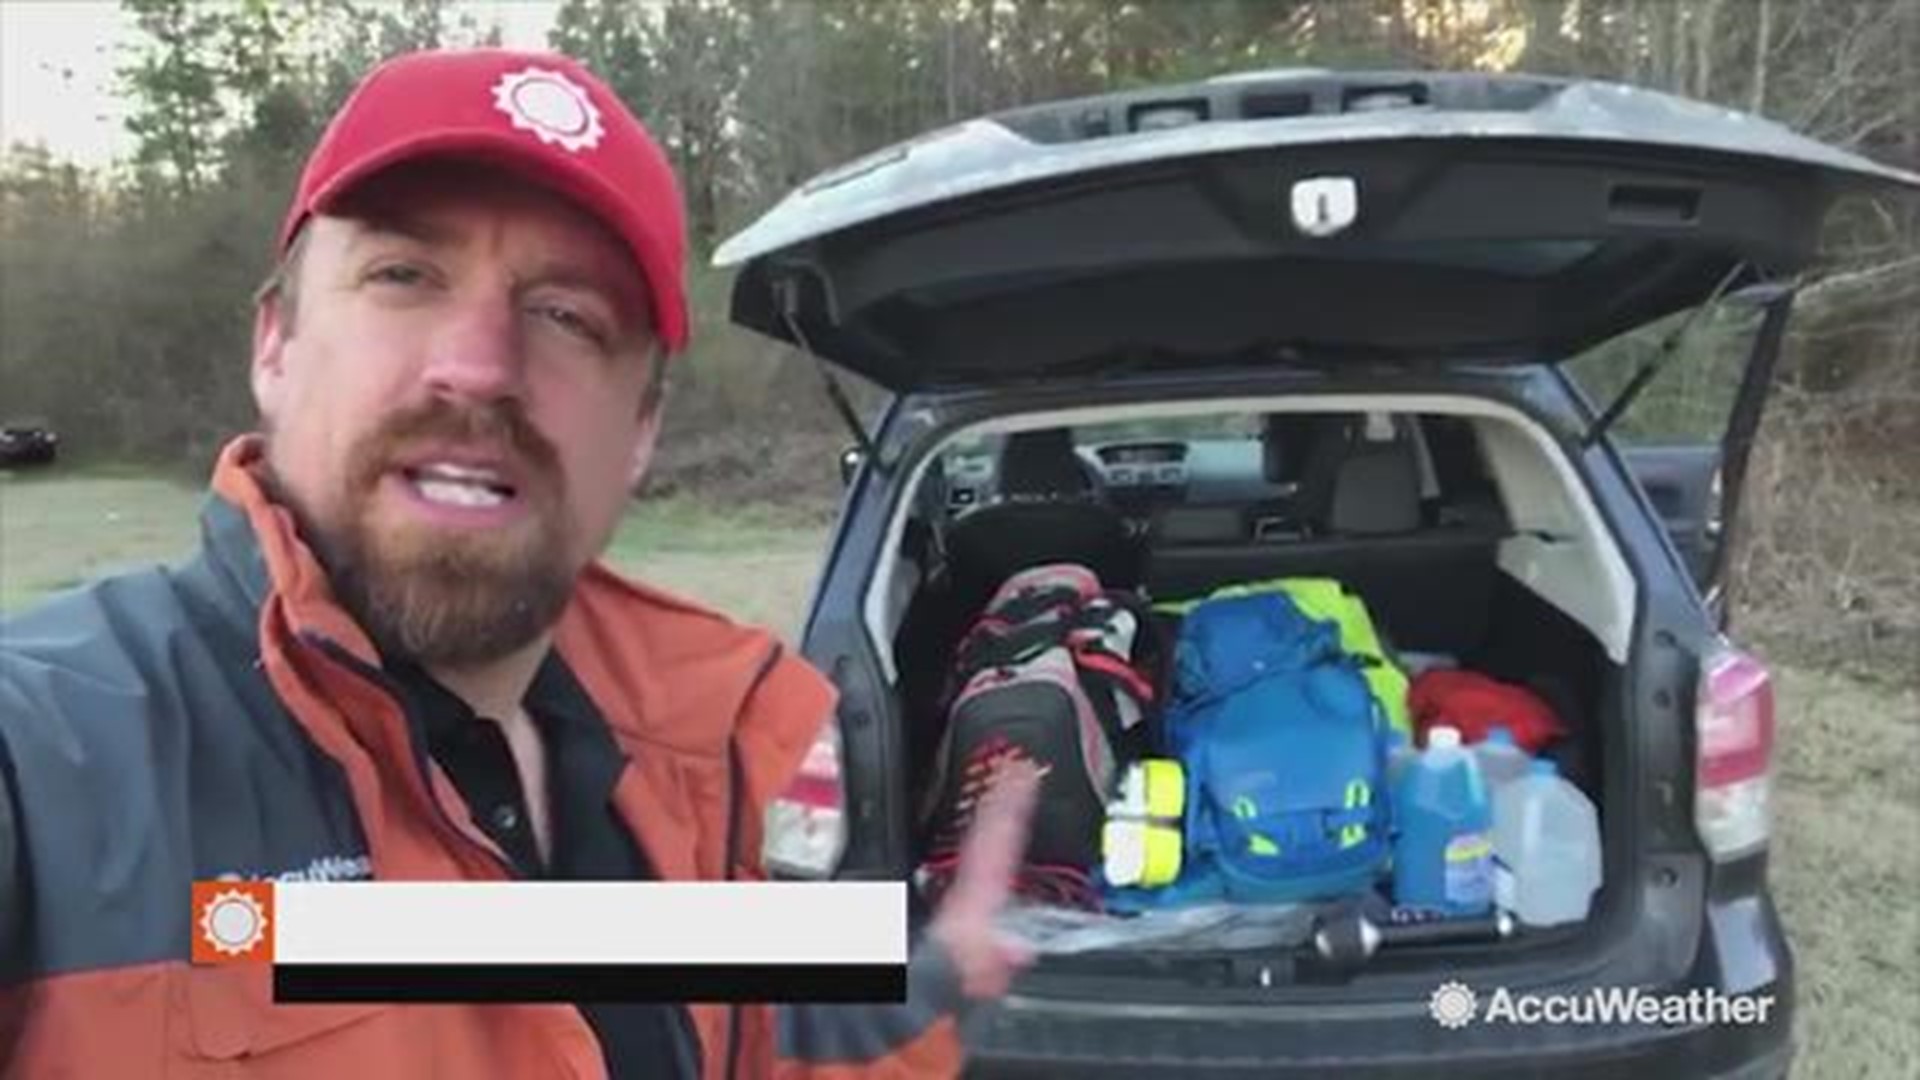 Extreme Meteorologist Reed Timmer packs up all the essentials for a winter storm chase. Reed makes sure he is prepared for whatever challenges the storm may provide.